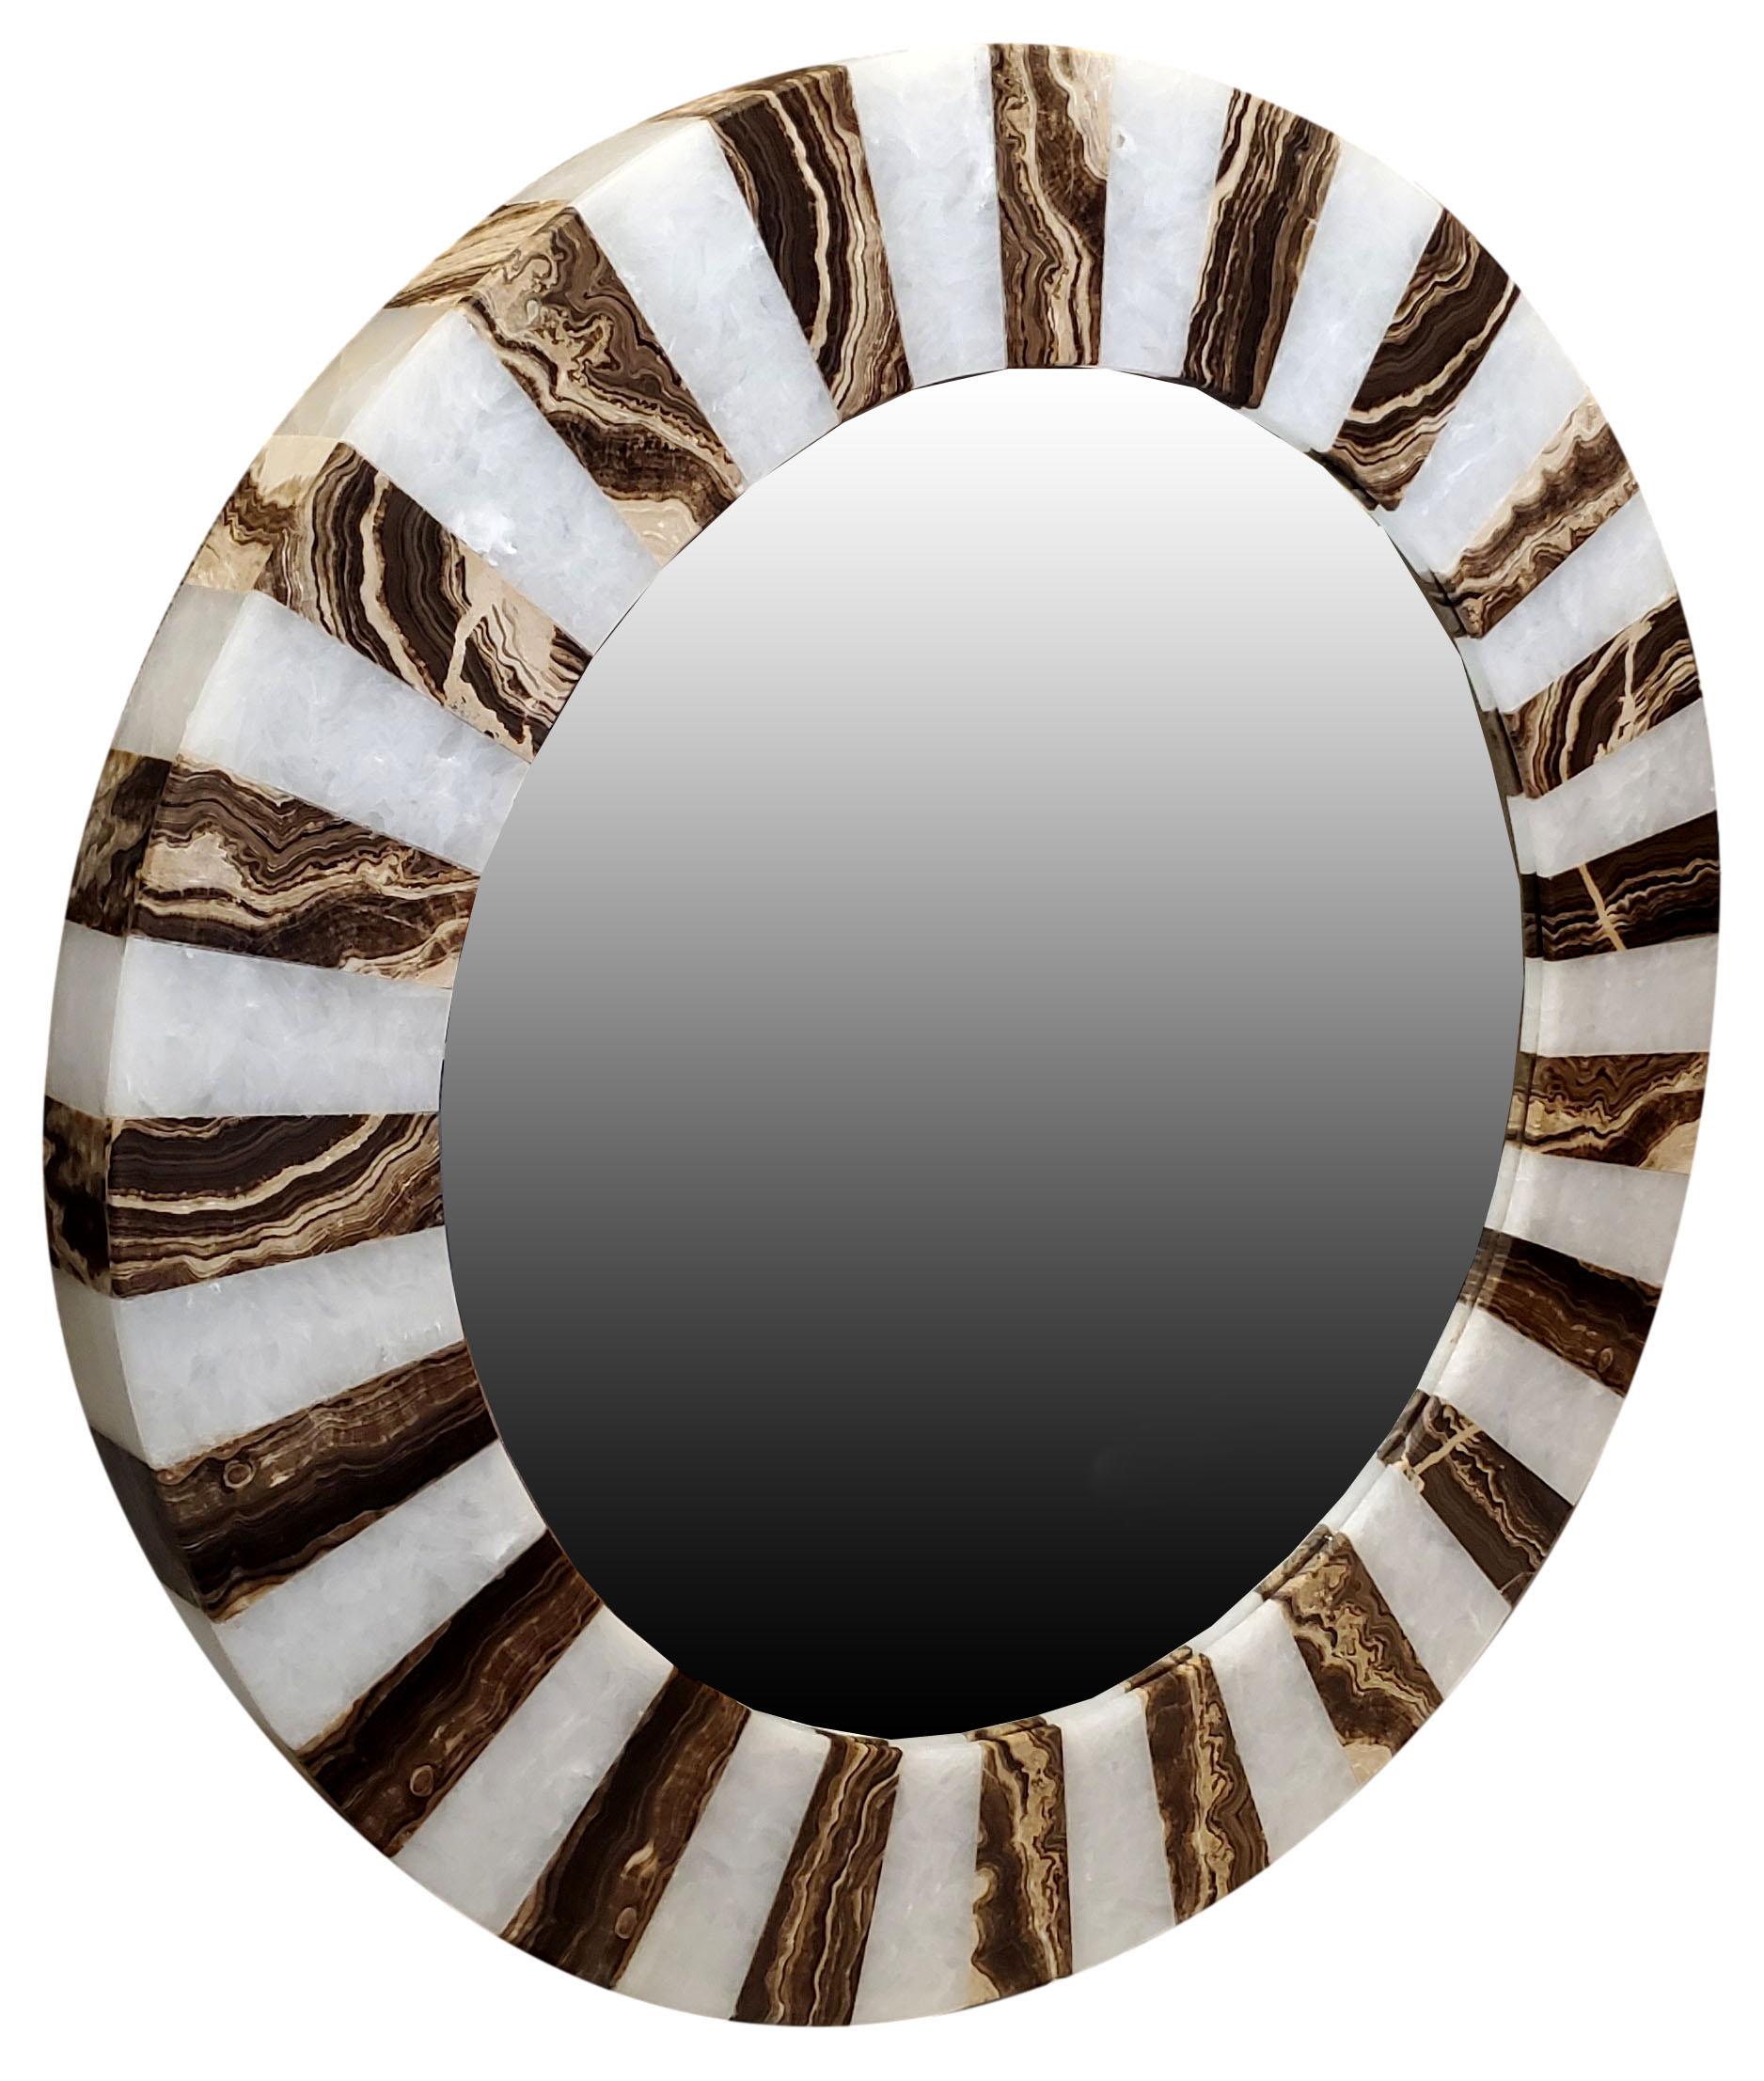 Onyx mirrors

Although there are a few other places in the world where the semi-precious stone Onyx exist, we found our collection in Mexico.

A bit of information on the semi-precious stone onyx.
While it is often thought of as the black